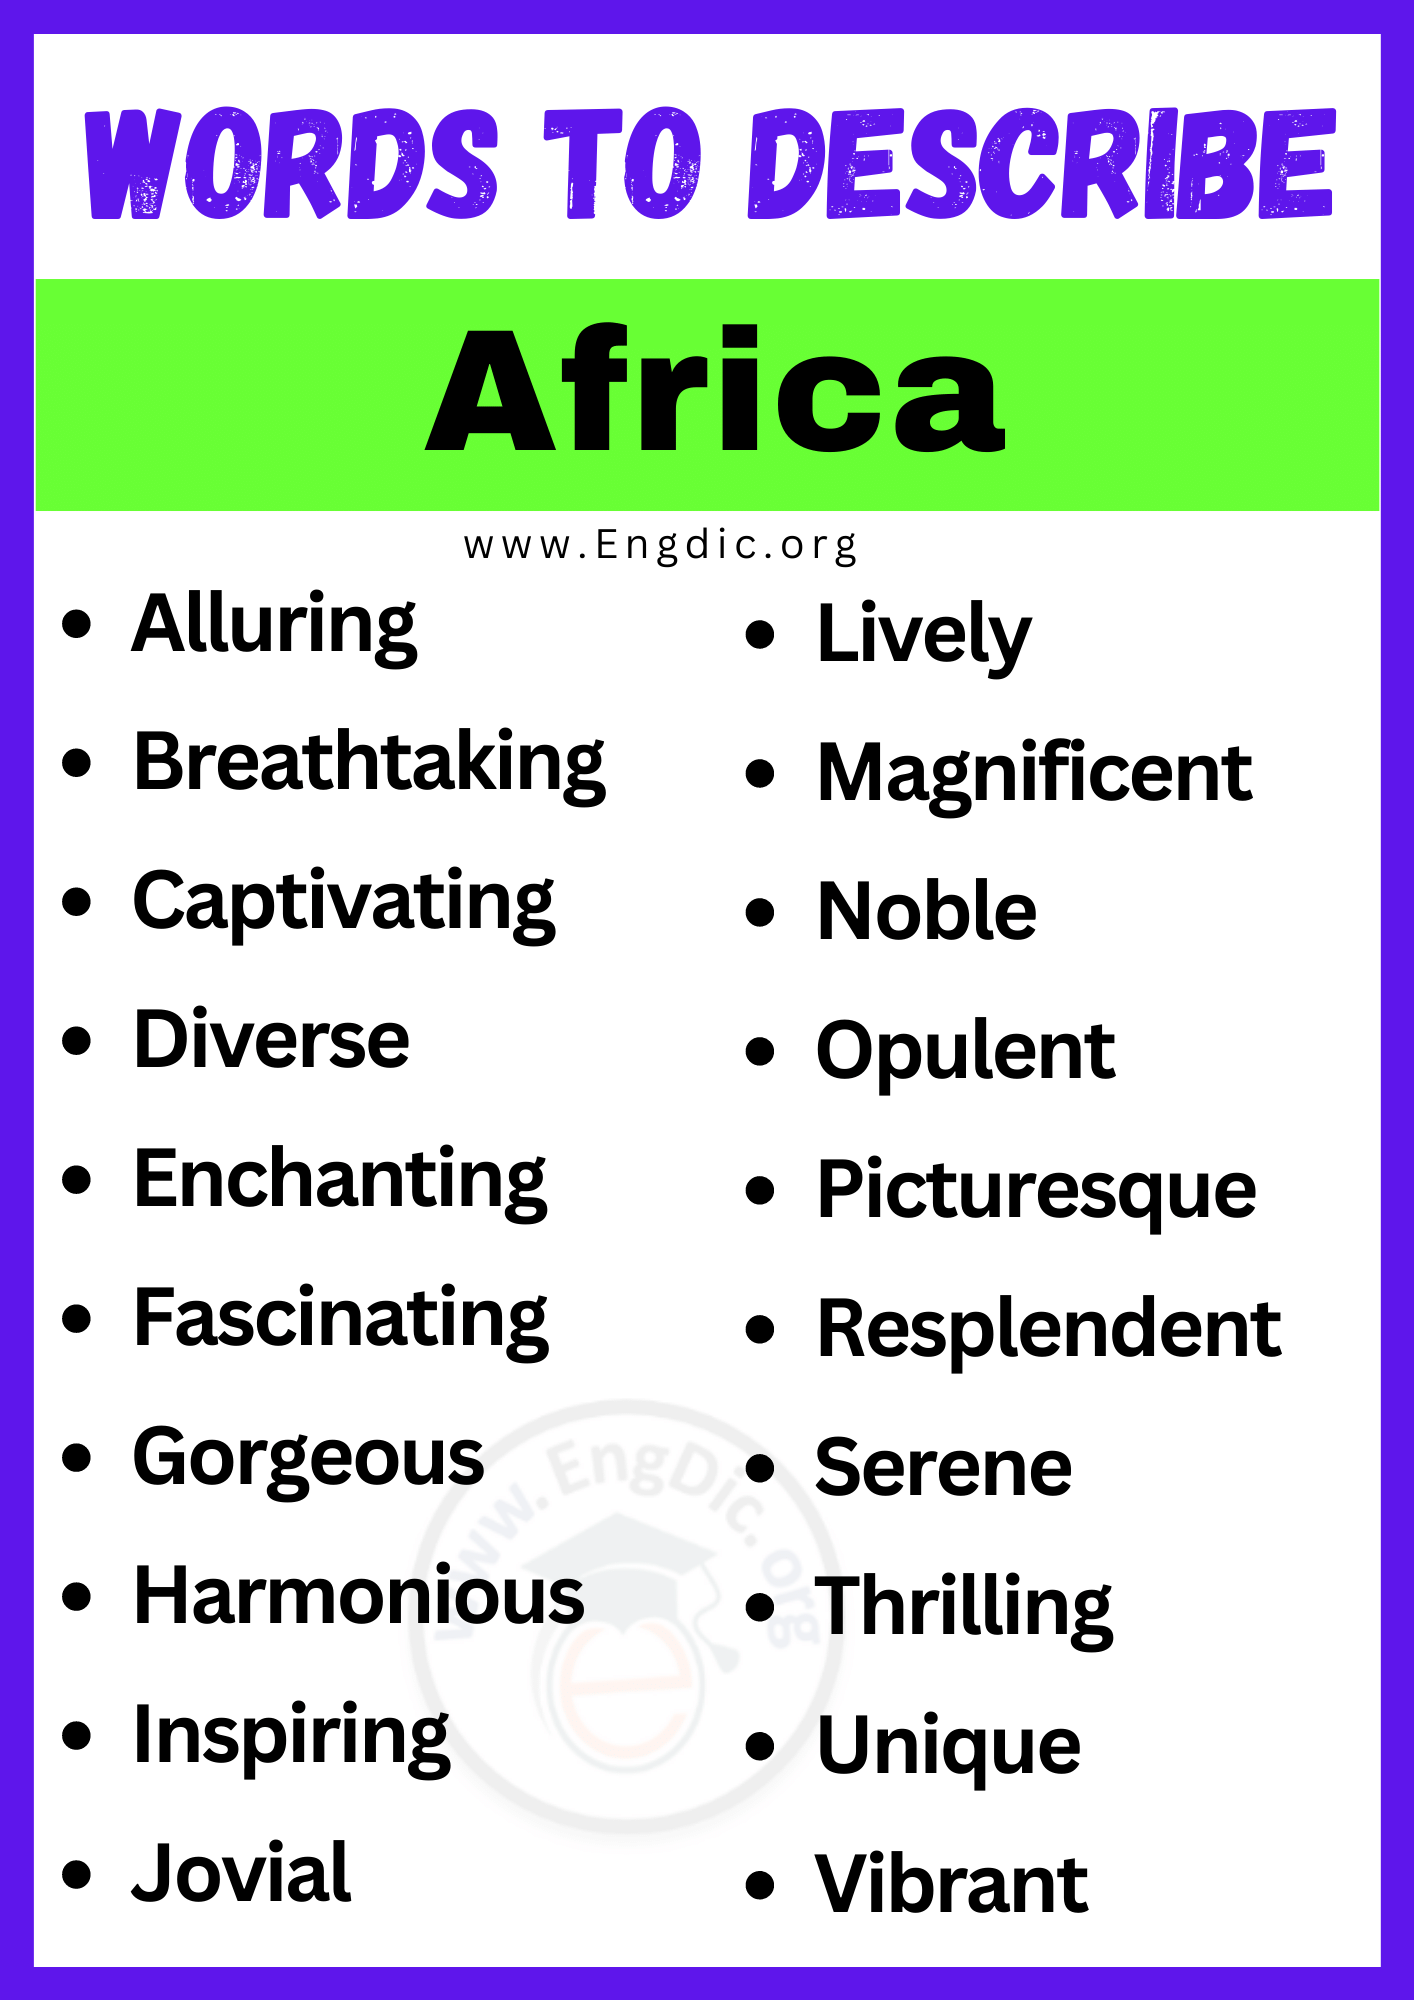 Words to Describe Africa